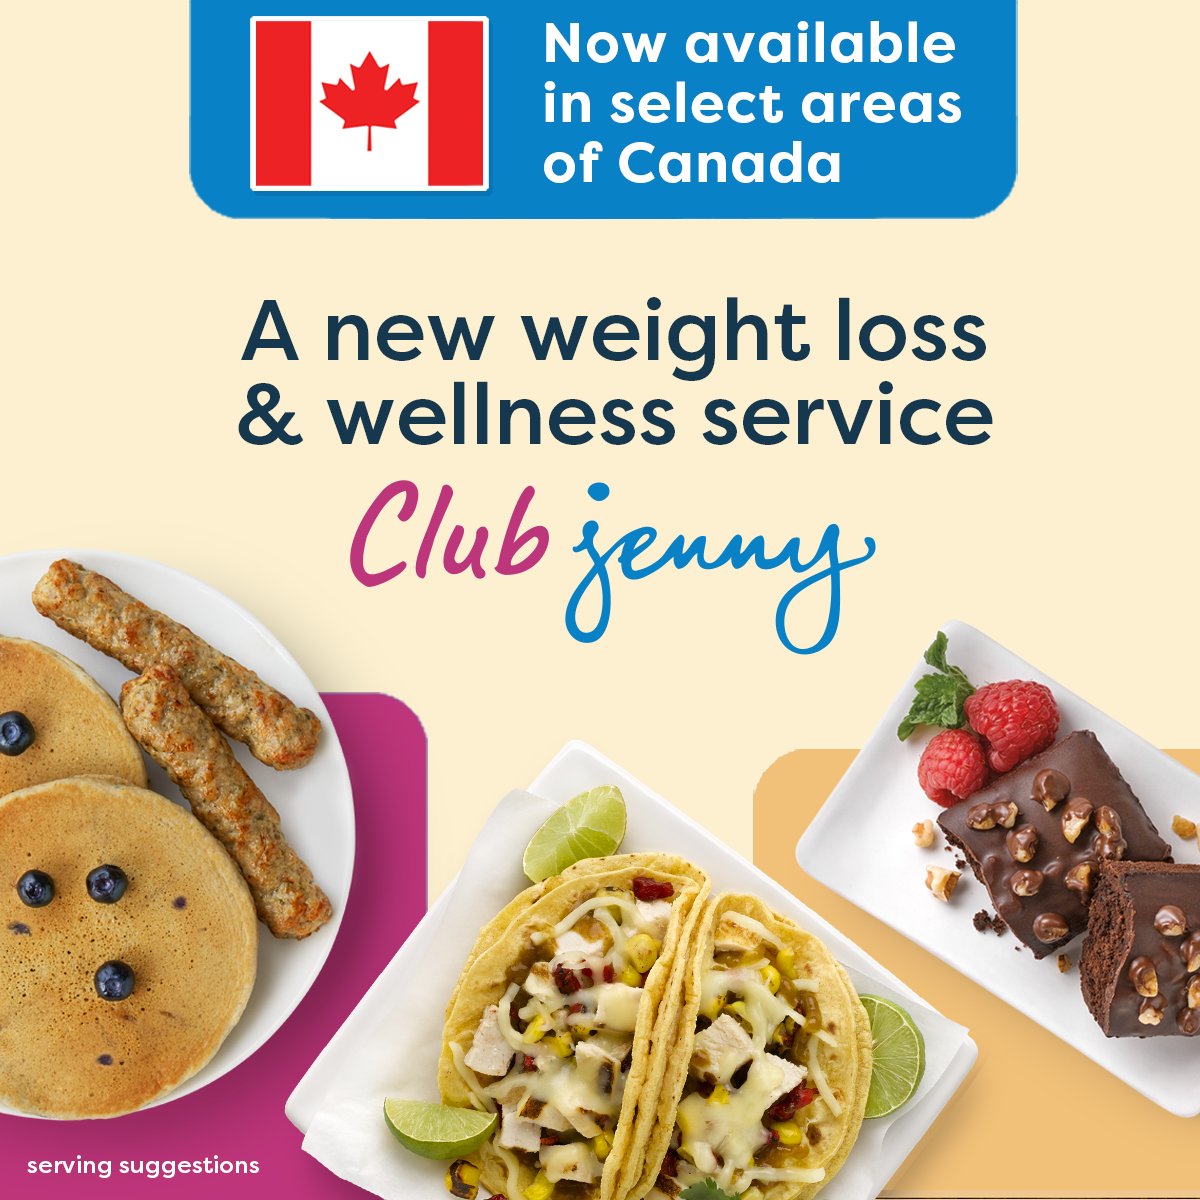 It’s official–Club Jenny is now available in Canada in the same select areas as Jenny Craig! 🥳🎉Order the meals you want, when you want them, and have them delivered right to your door. Access Club Jenny now at jennycraig.com/club-jenny 💙